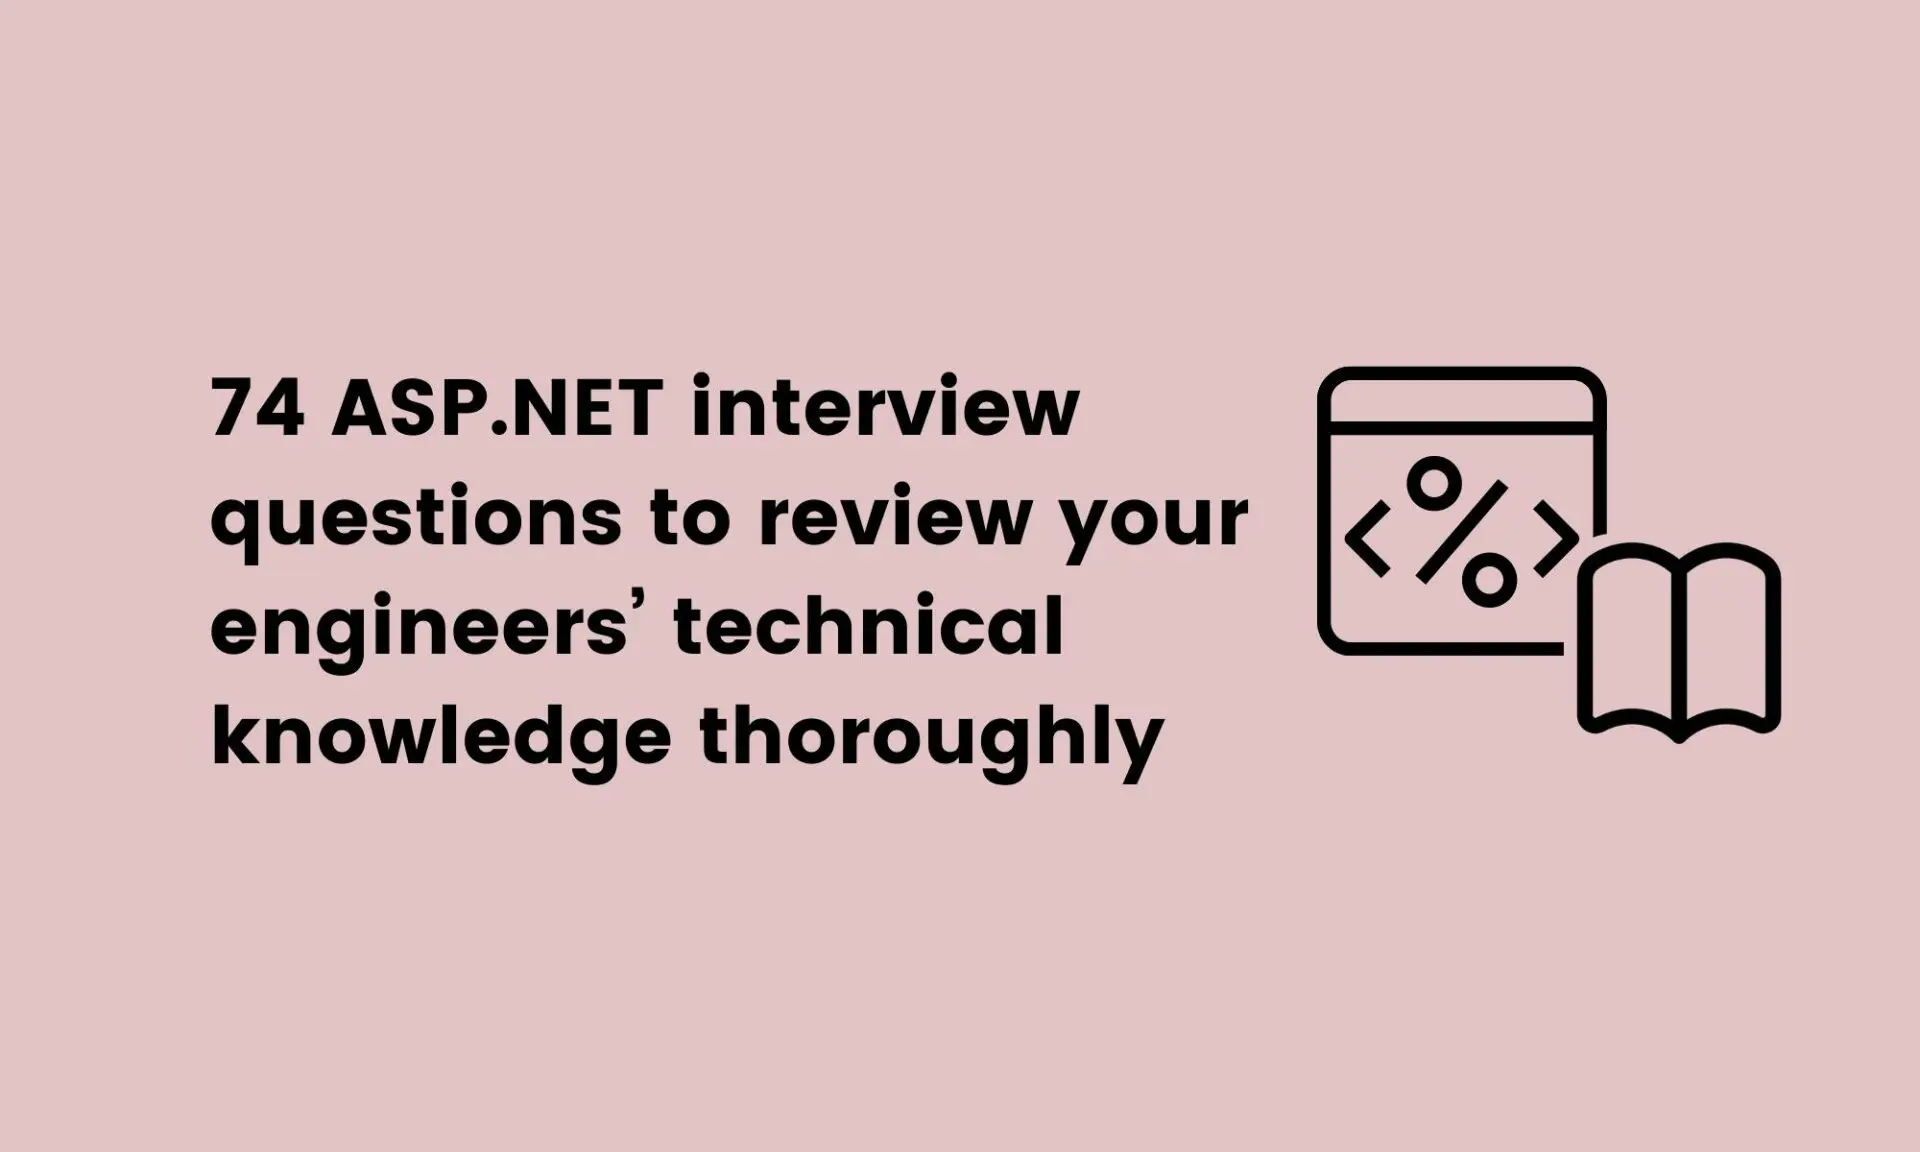 74 ASP.NET interview questions to review your engineers’ technical knowledge thoroughly